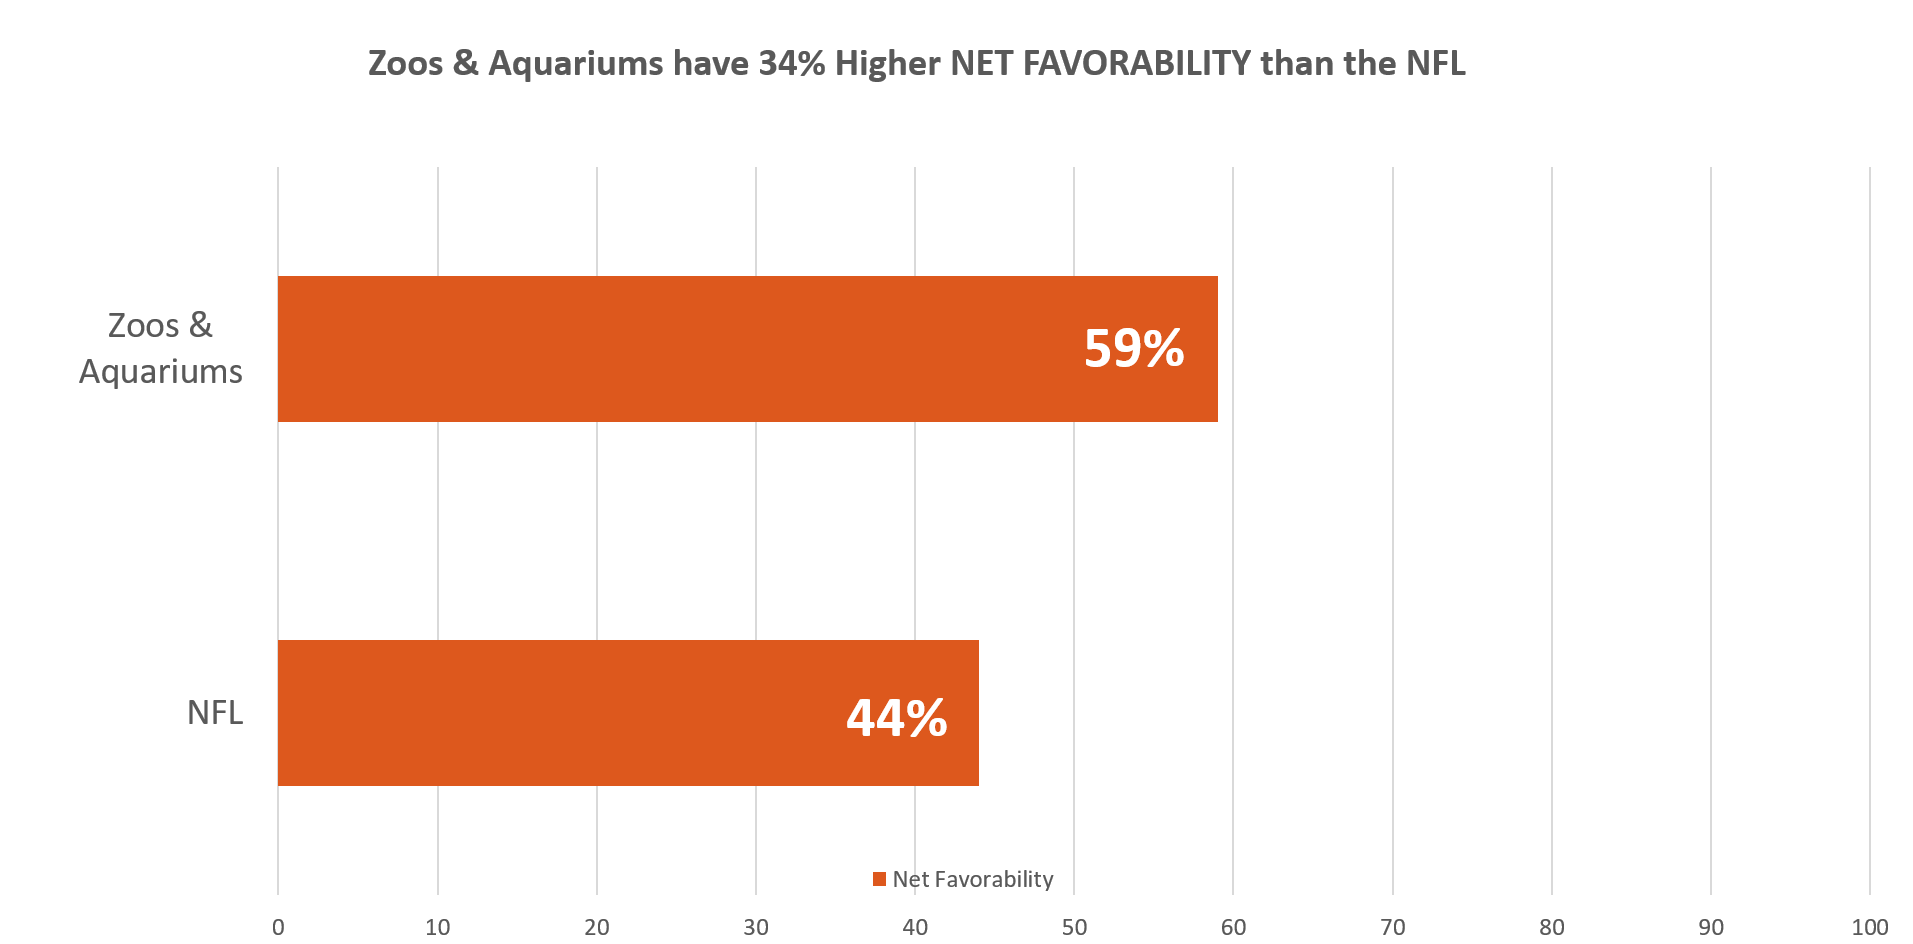 Zoos & aquariums have 34% higher favorability than the NFL 